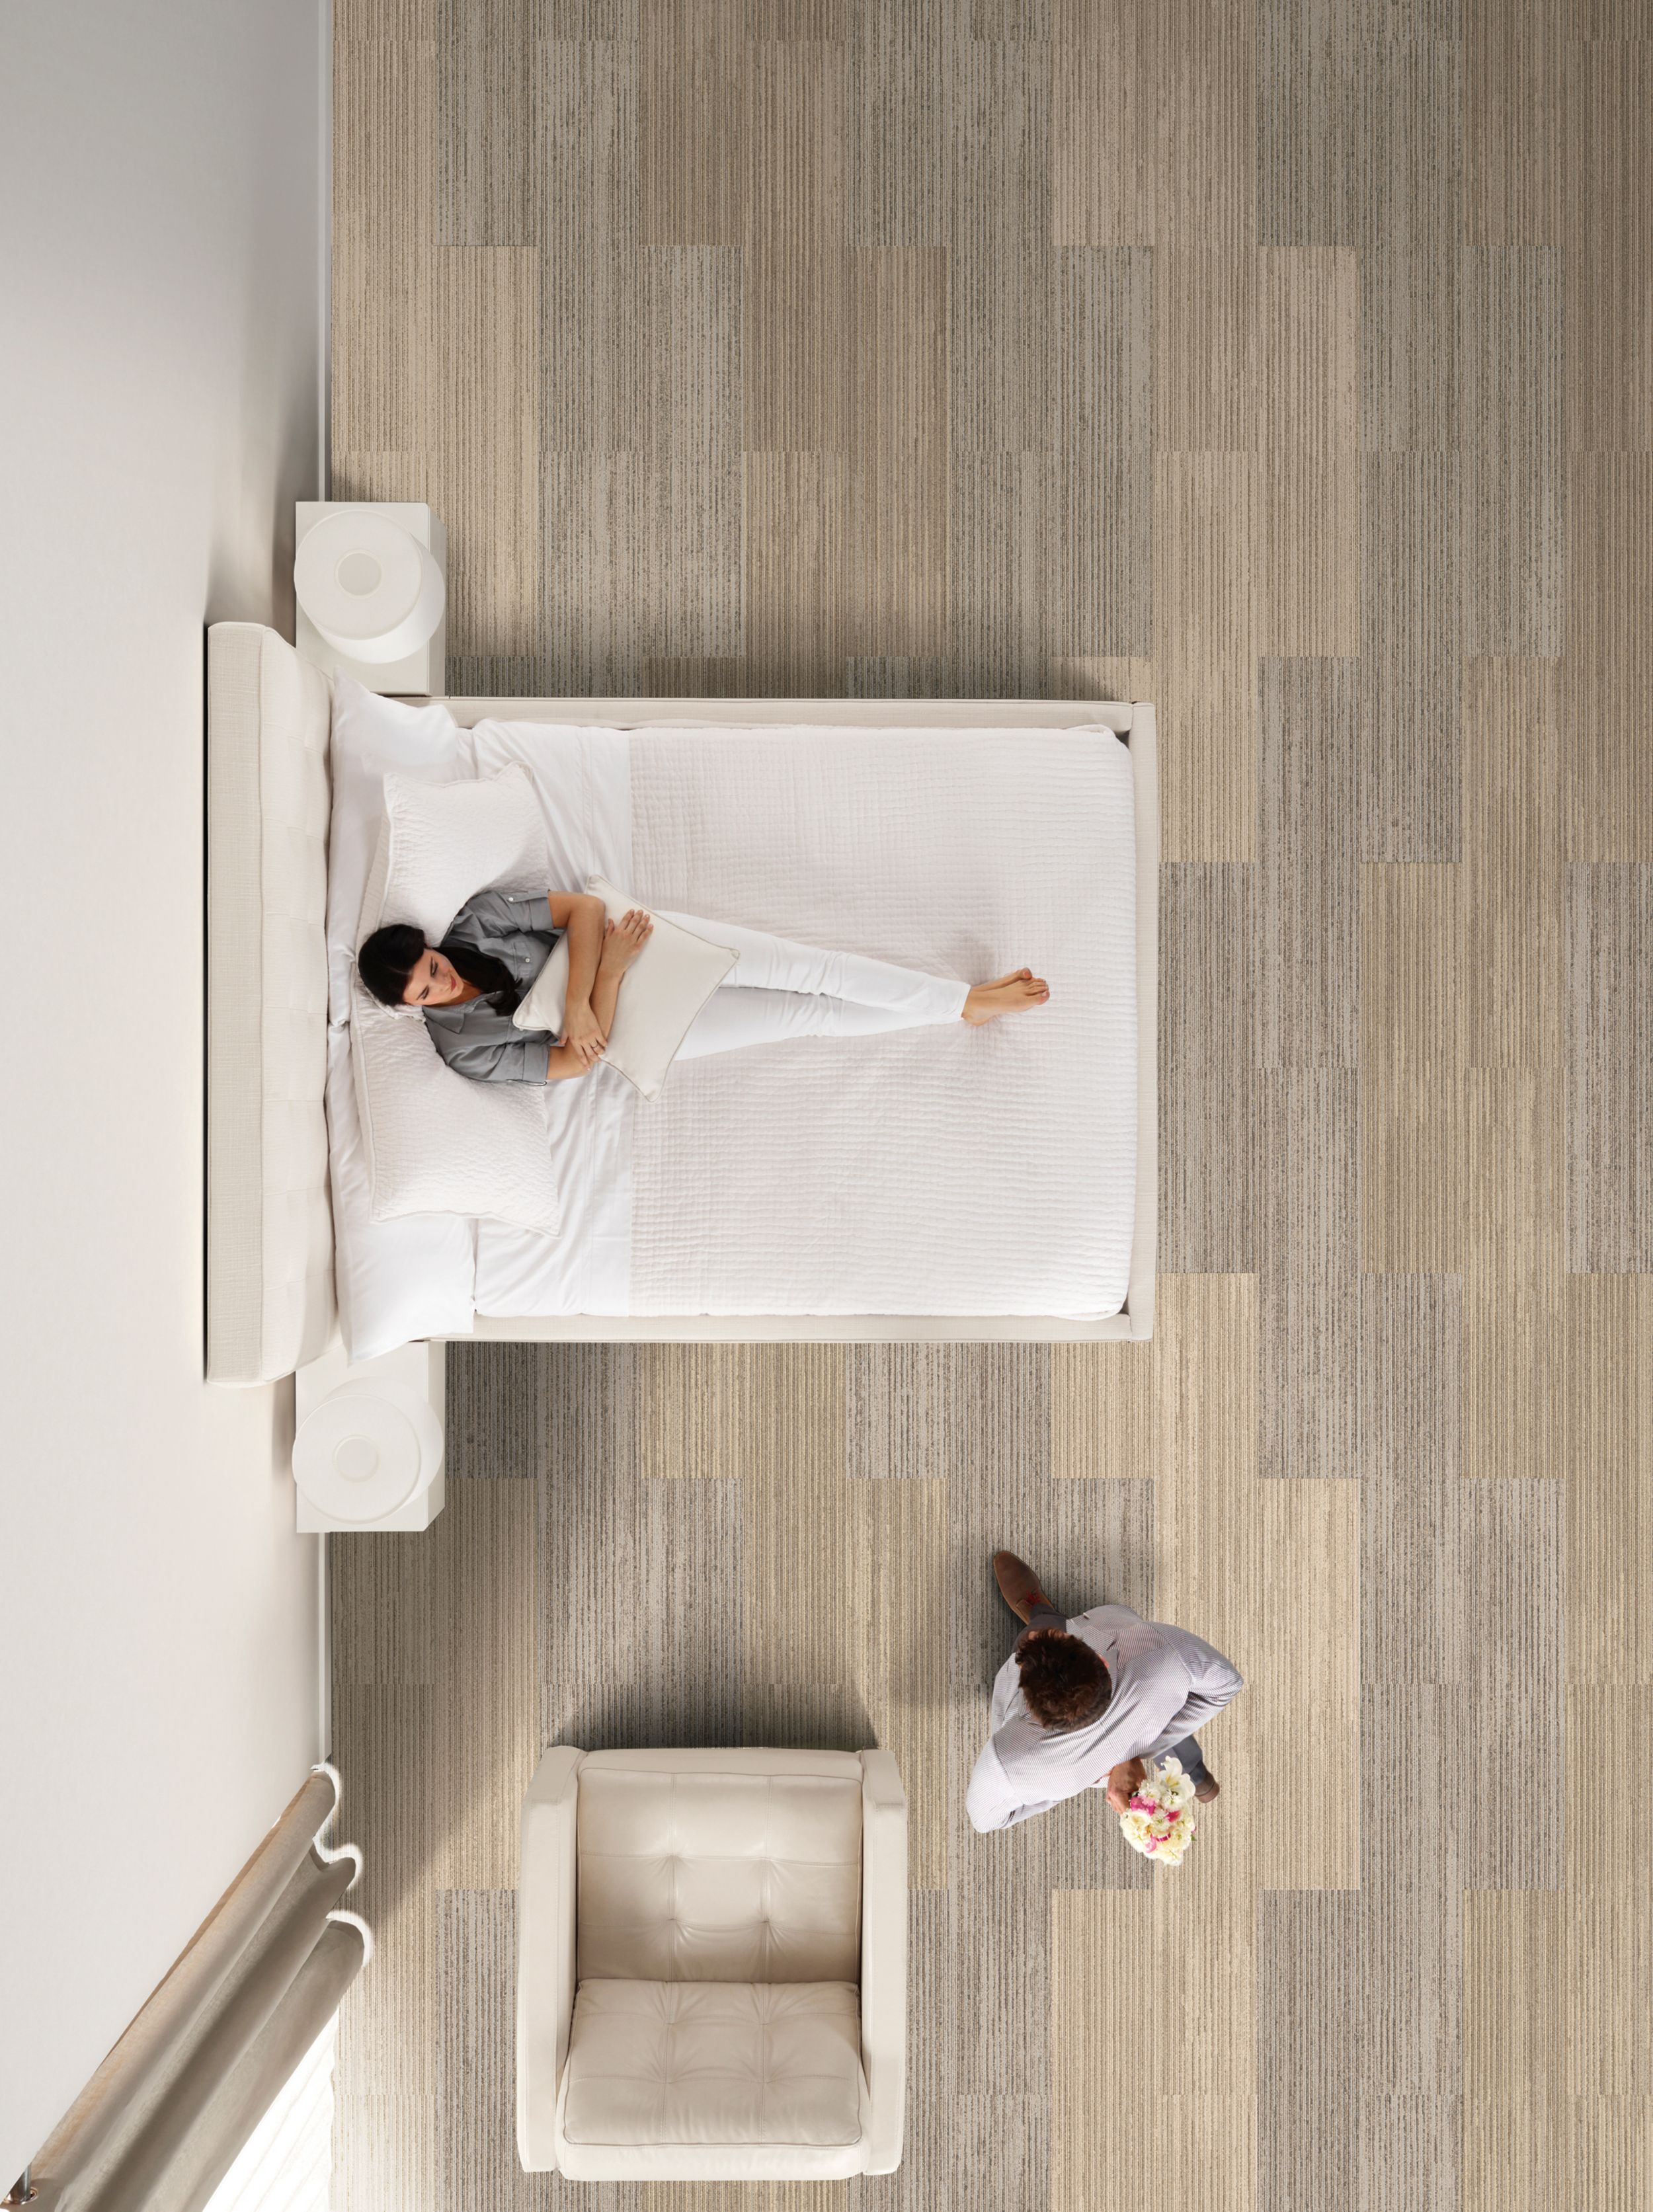 Interface SWTS 110 plank carpet tile in hotel guest room with woman and child numéro d’image 3